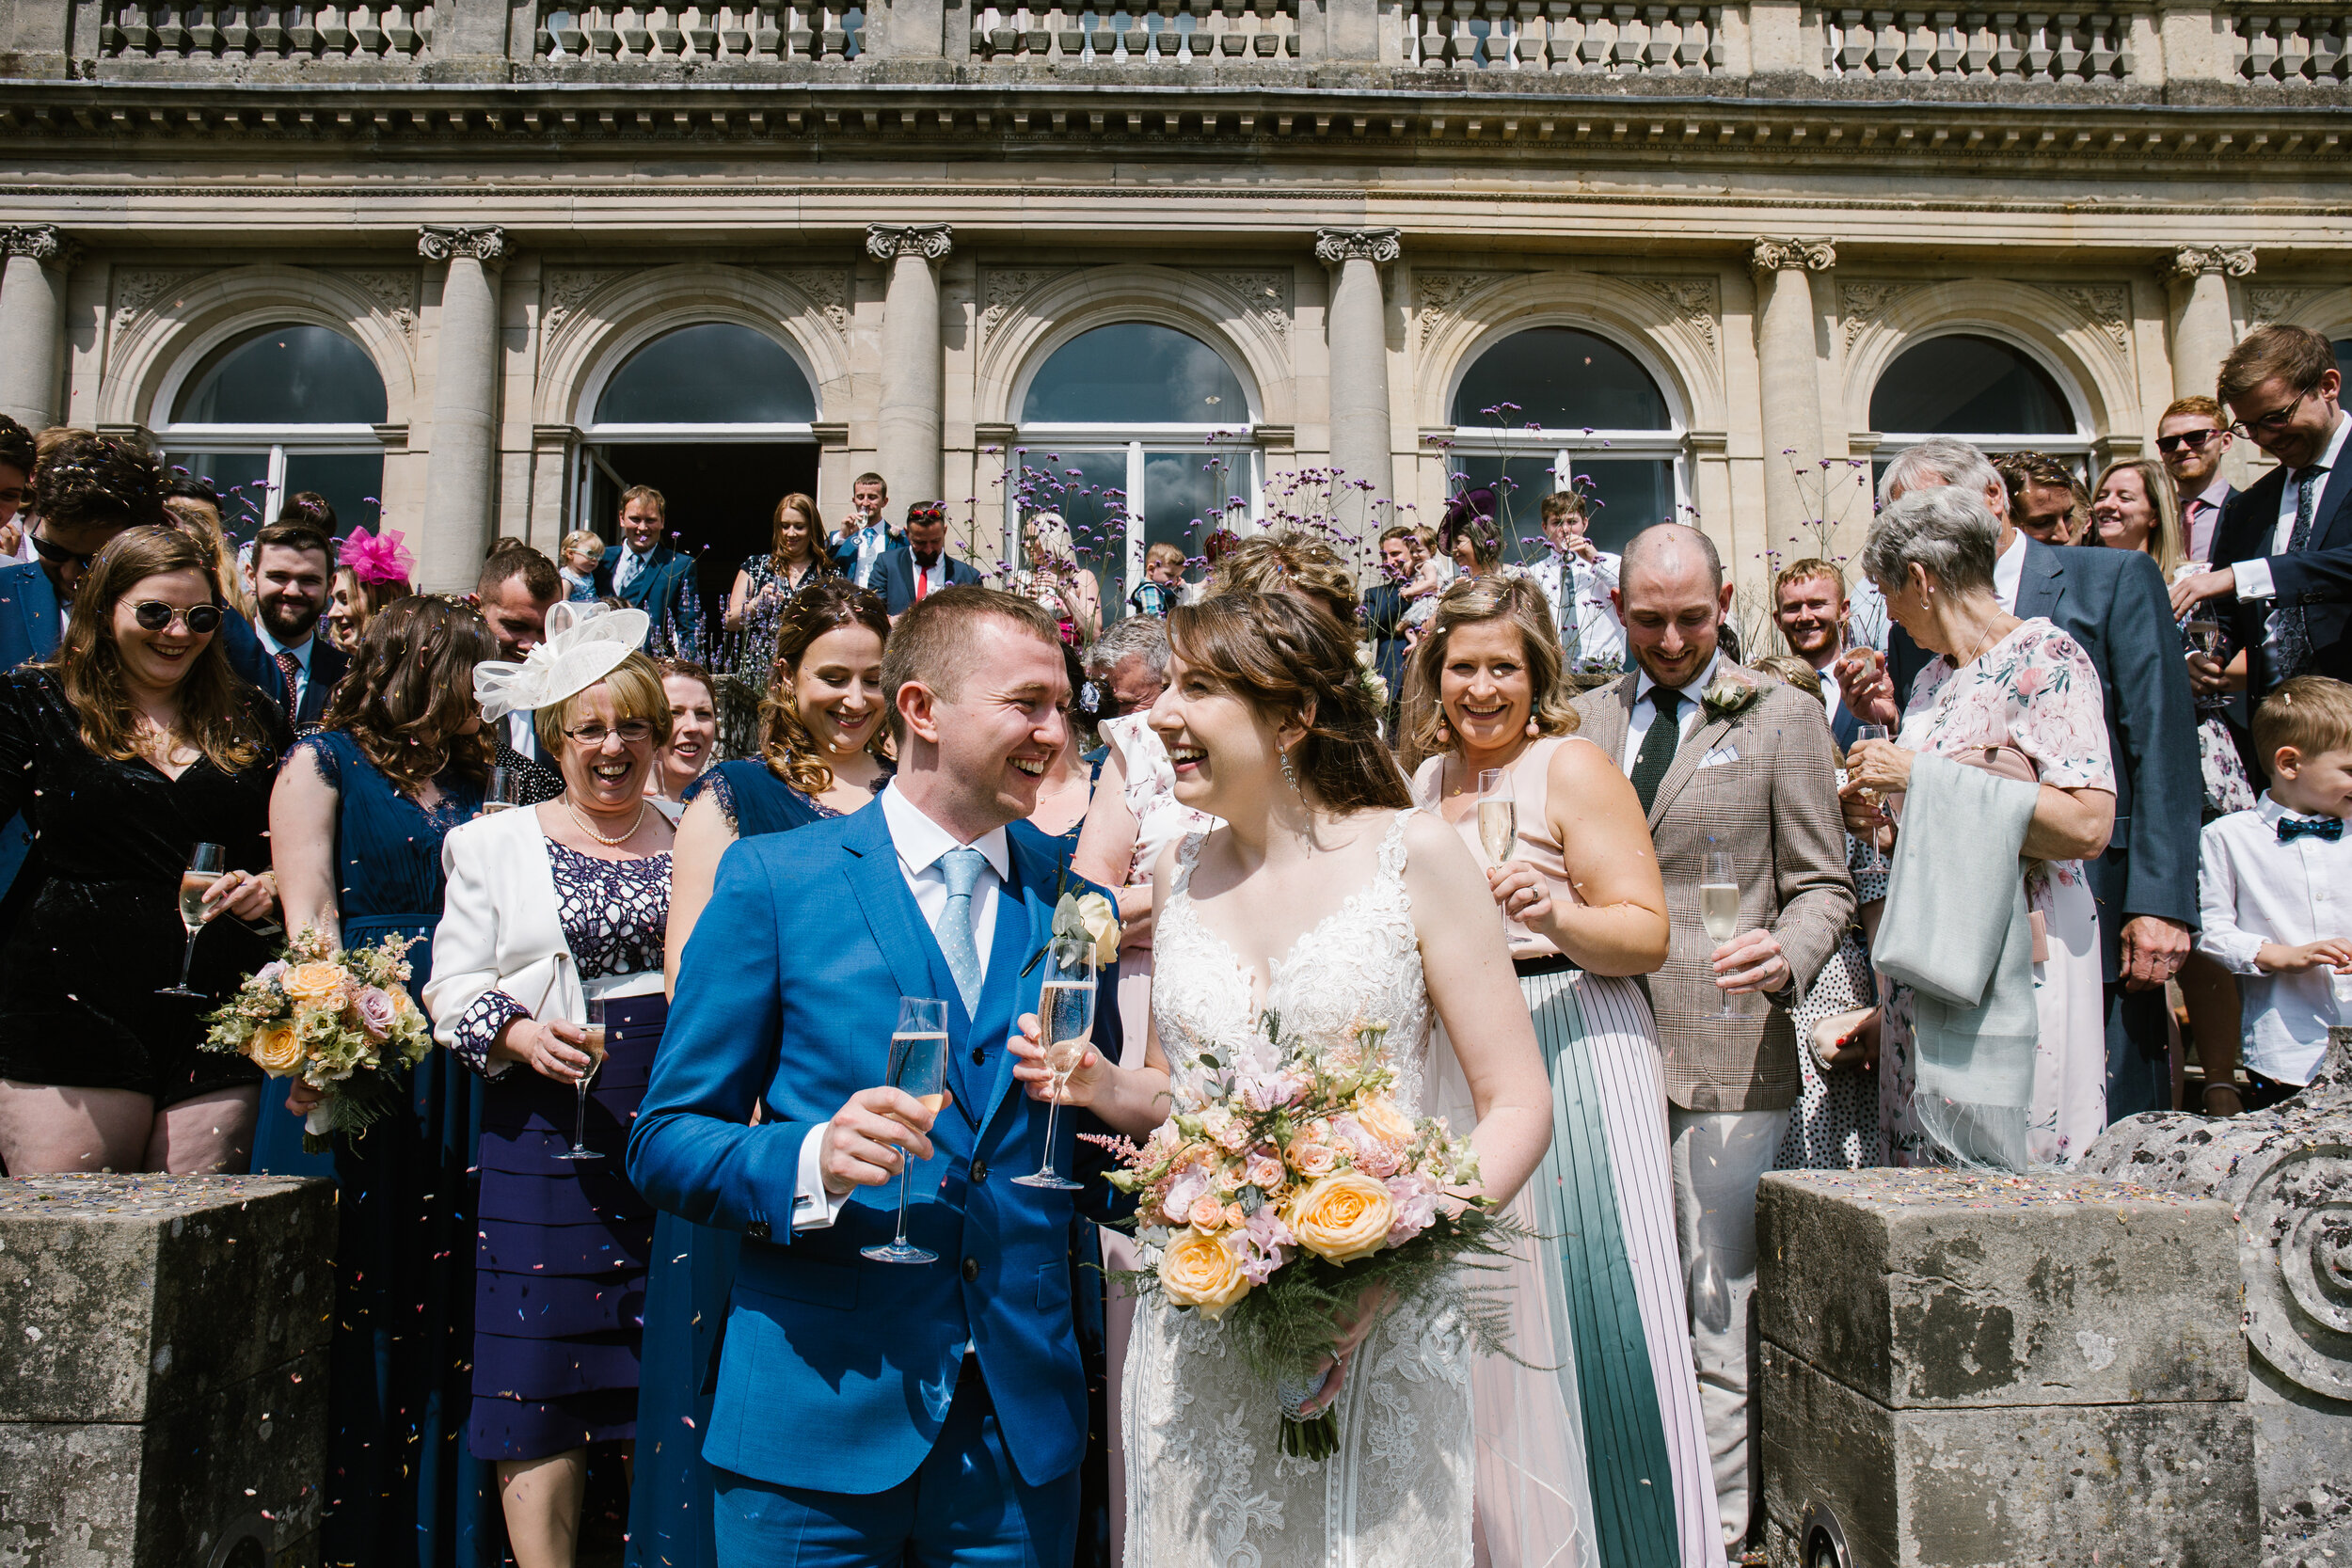 bride and groom smiling around their guests as confetti is showered over them